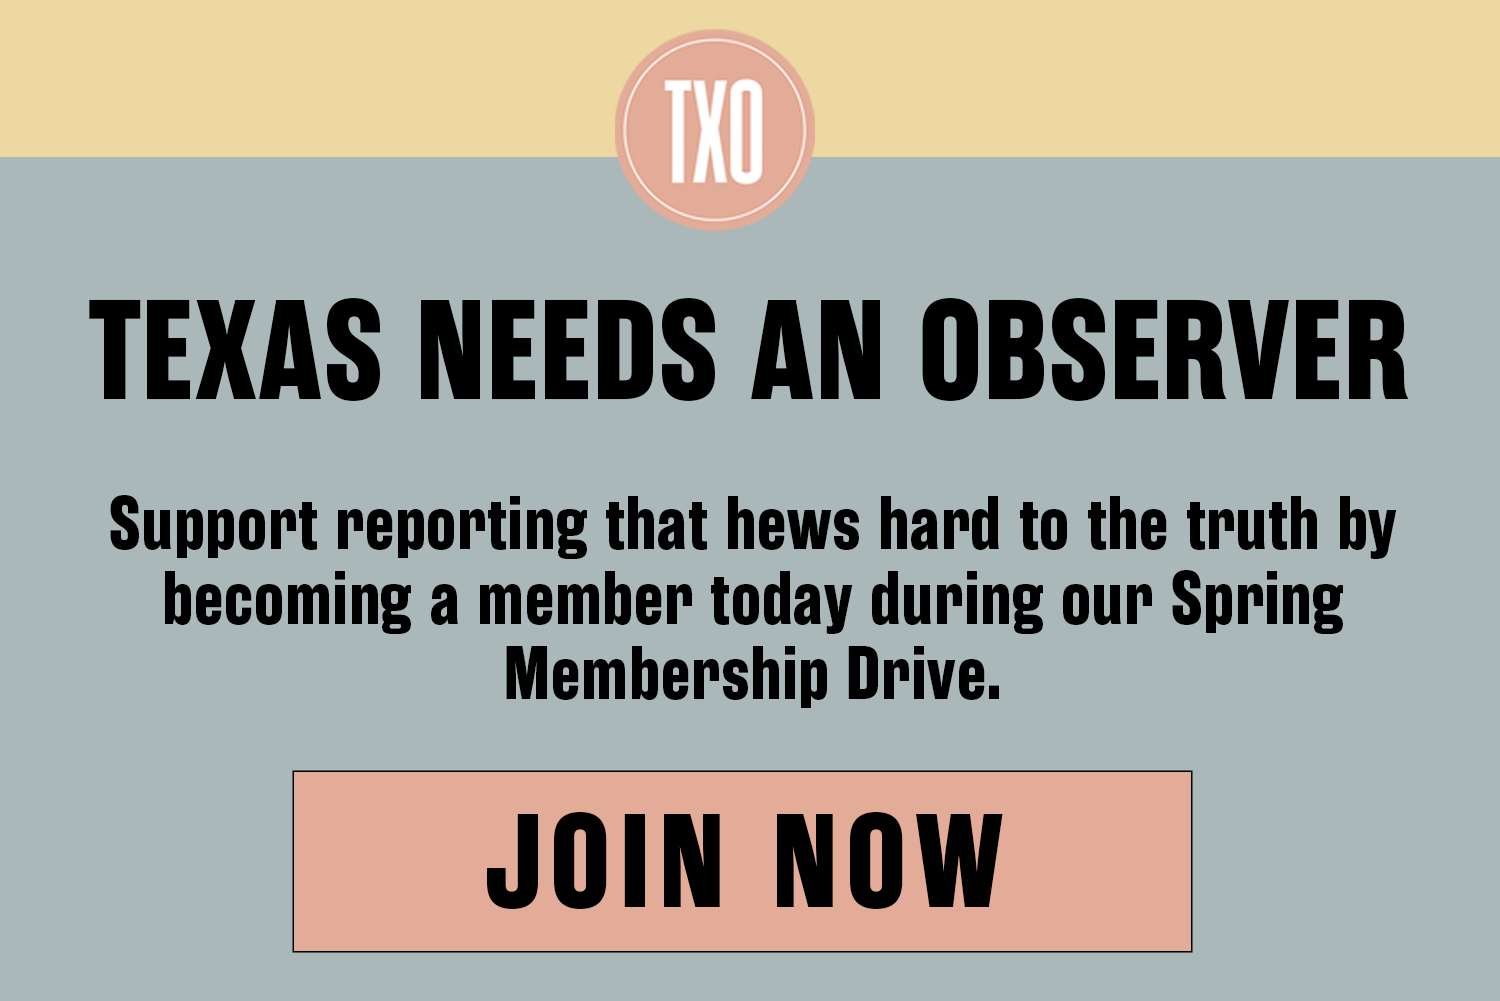 An ad with the text: When Texas is at its worst, the Texas Observer must be at its best. We need your support to do it. A button reads: JOIN NOW